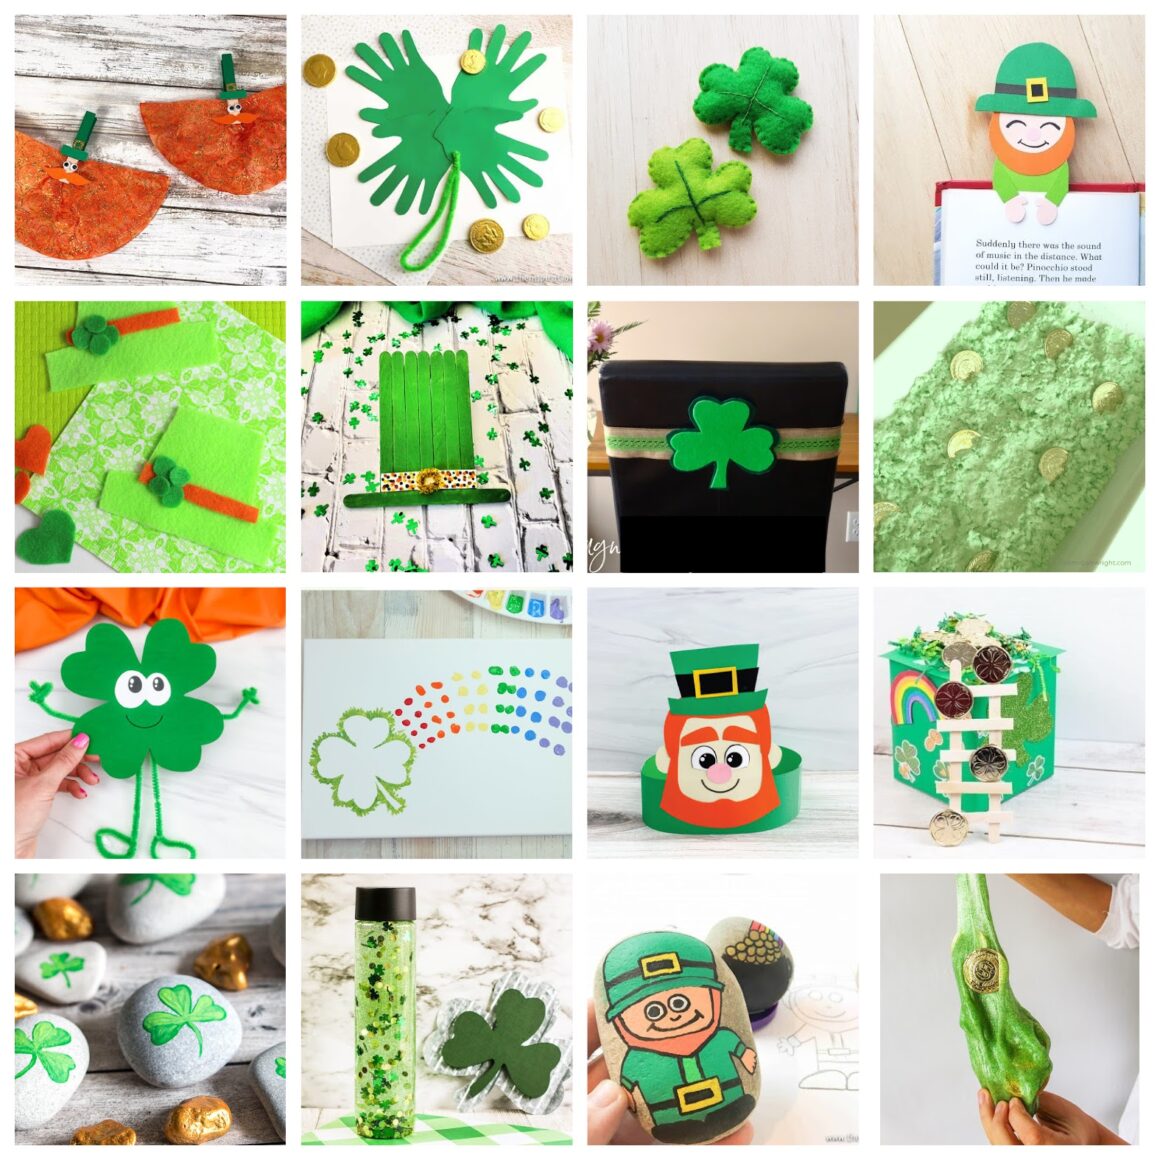 St. Patrick's Day Crafts for Kids to Make by Champagne and Sugarplums